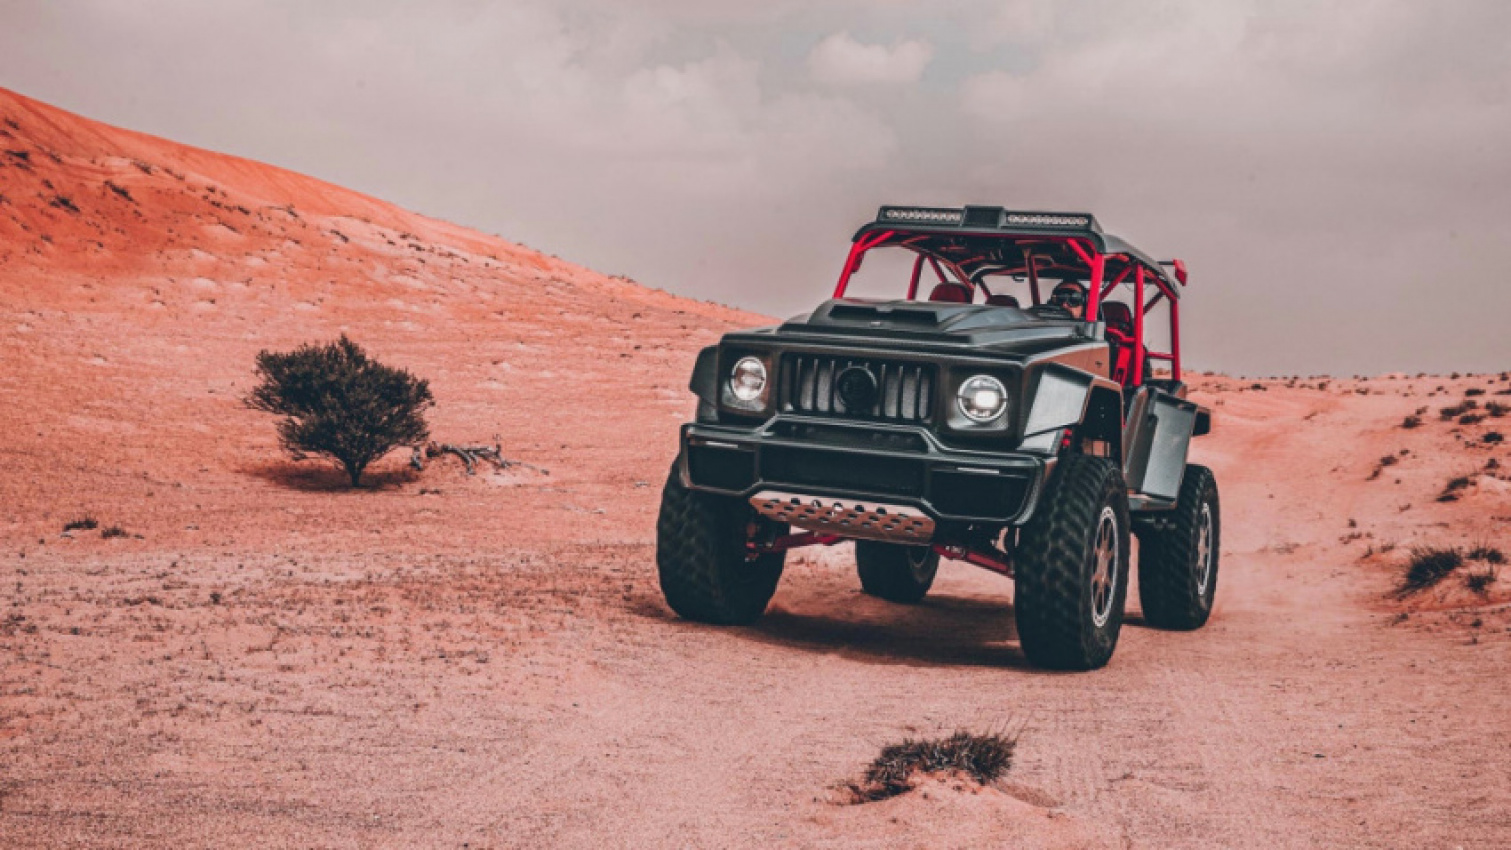 autos, cars, mercedes-benz, brabus, luxury cars, mercedes, mercedes-benz g class news, mercedes-benz news, modified, off-road, suvs, brabus 900 crawler is the mercedes-benz g-class of childhood dreams